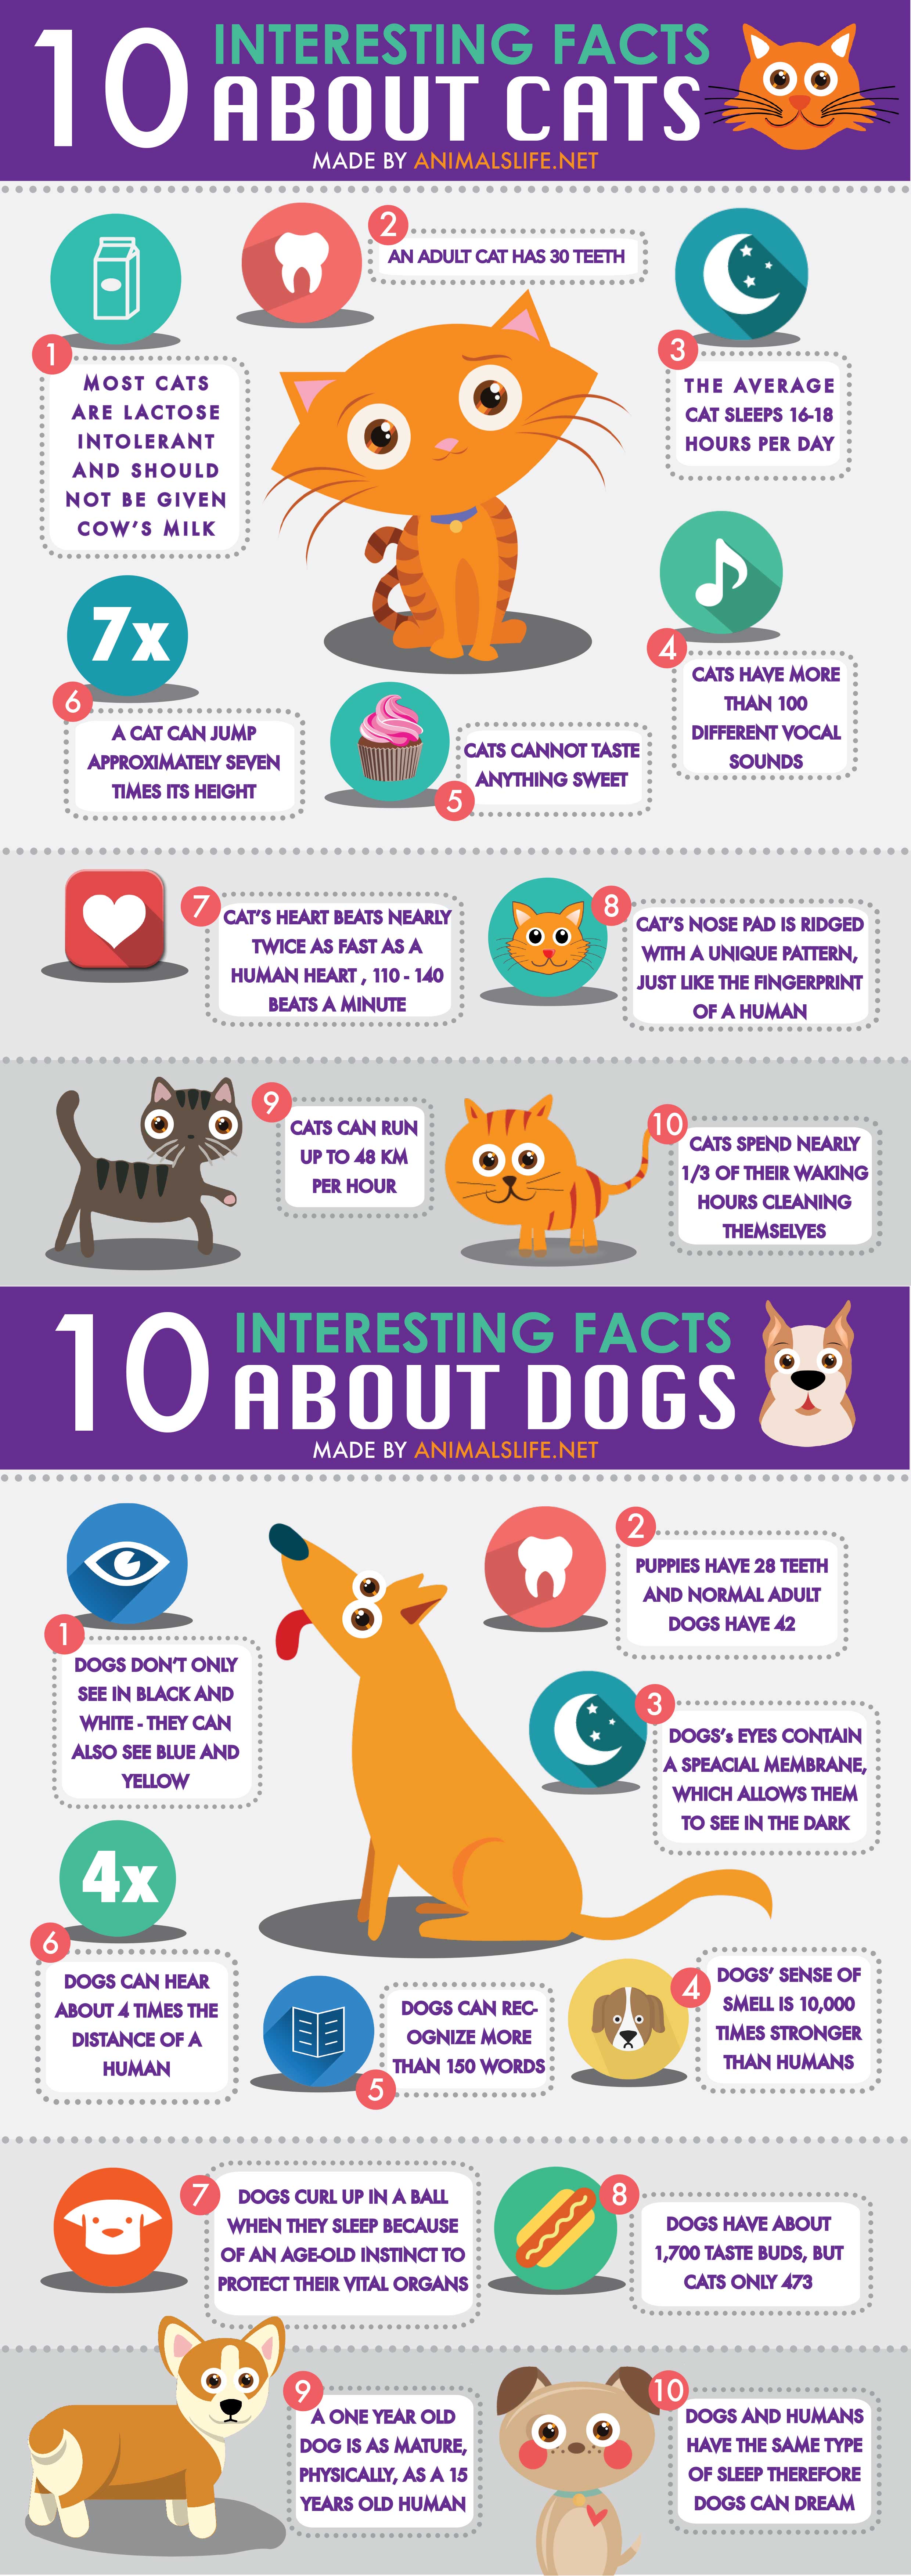 top 10 facts about cats